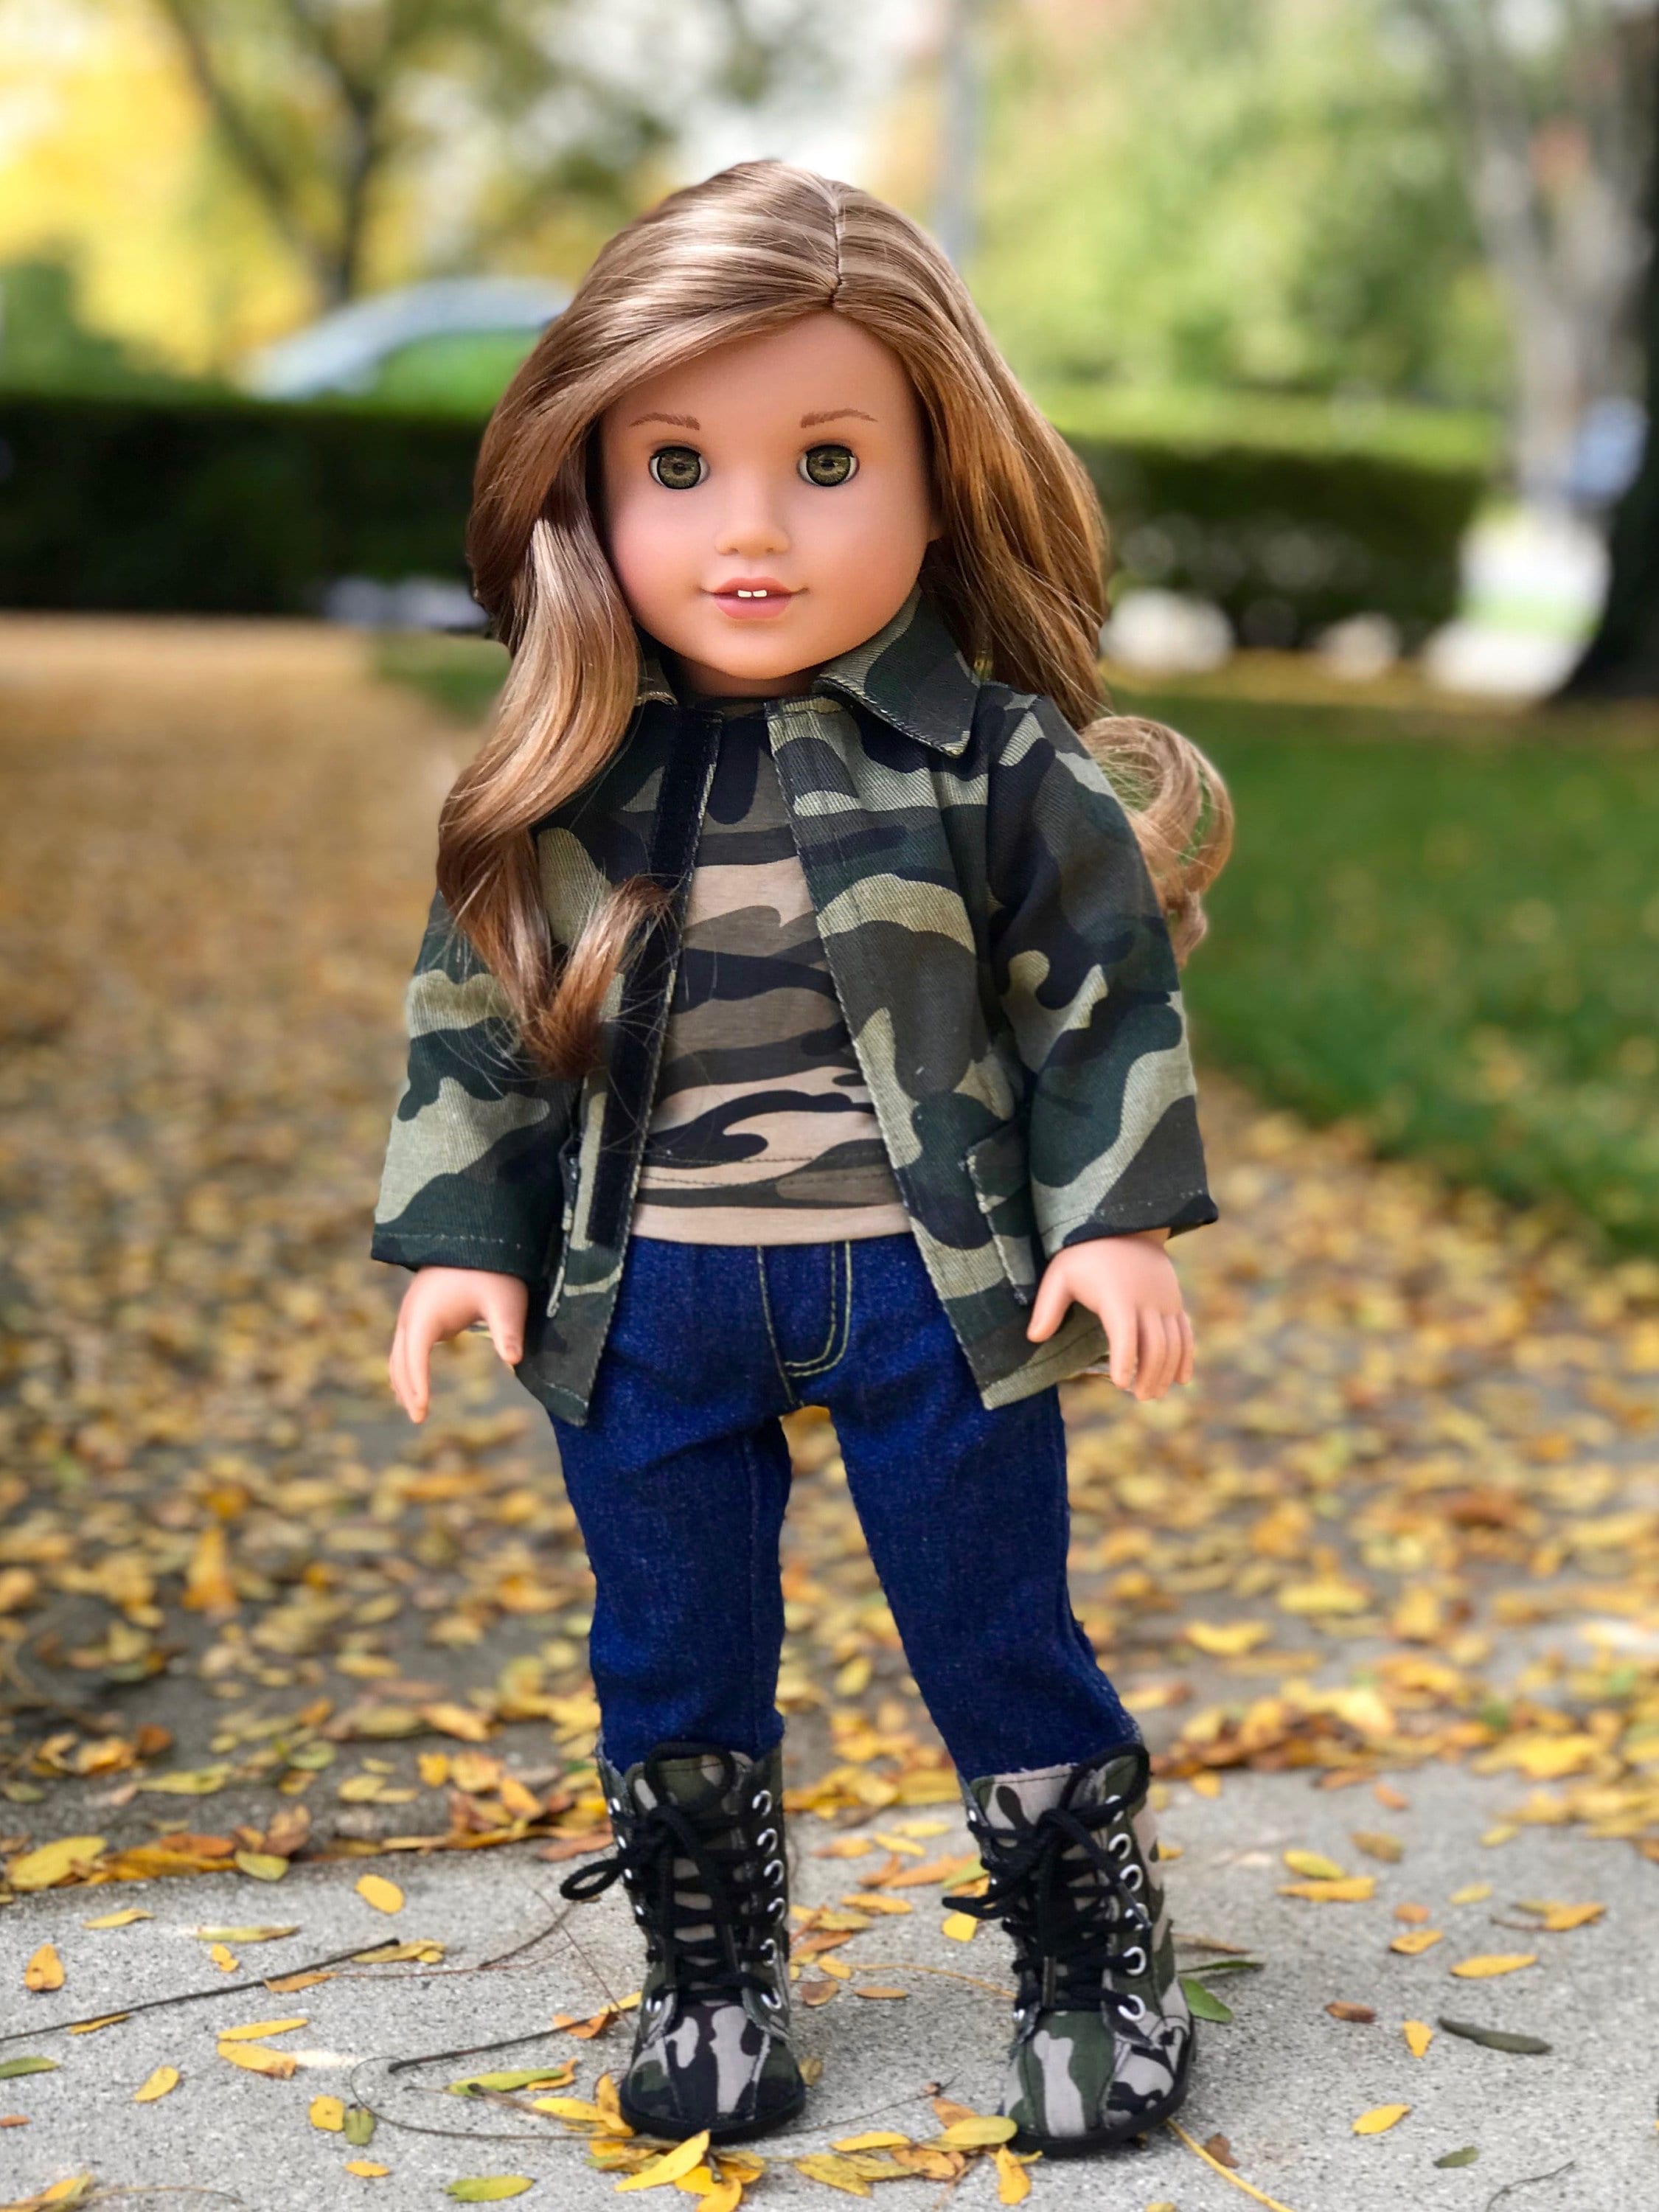 Full Outfit with Jeans! 18" American Dolls Clothes 